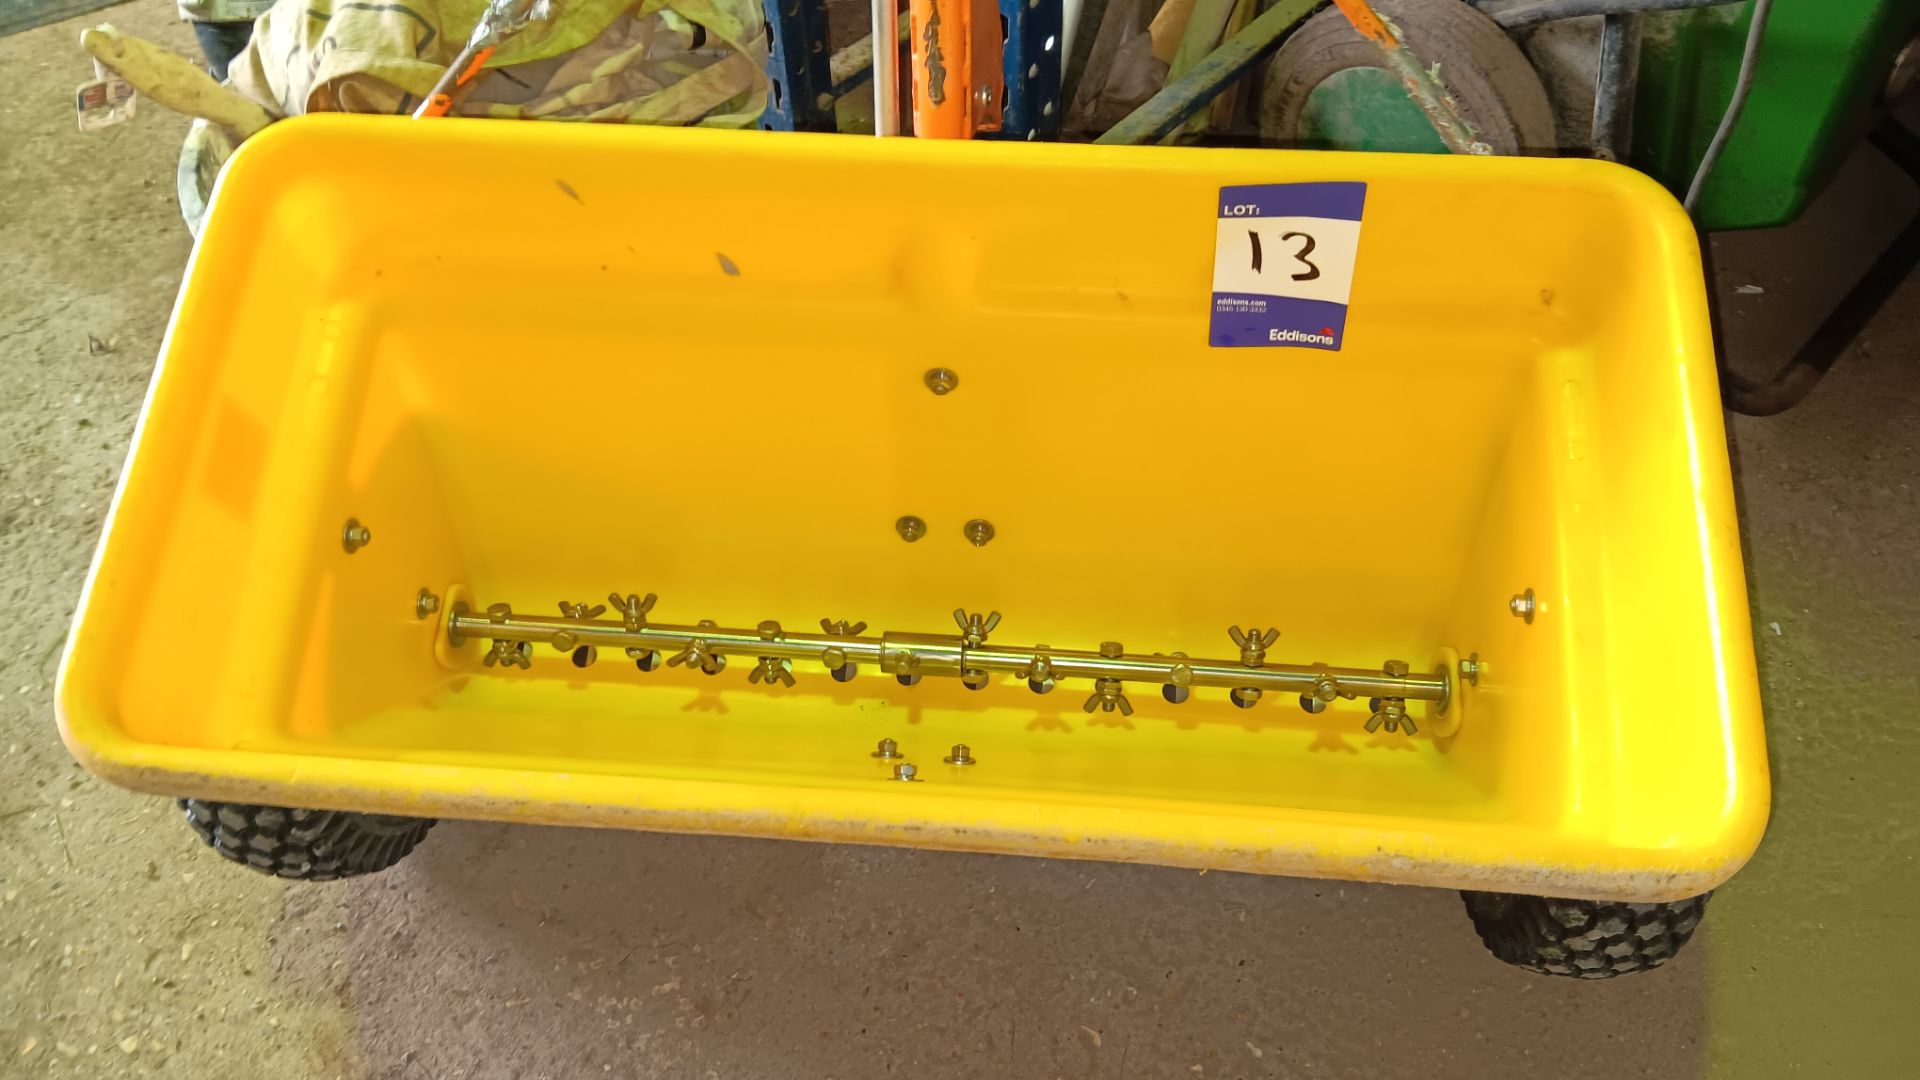 Cemo professional grade seed drop spreader - Image 4 of 4